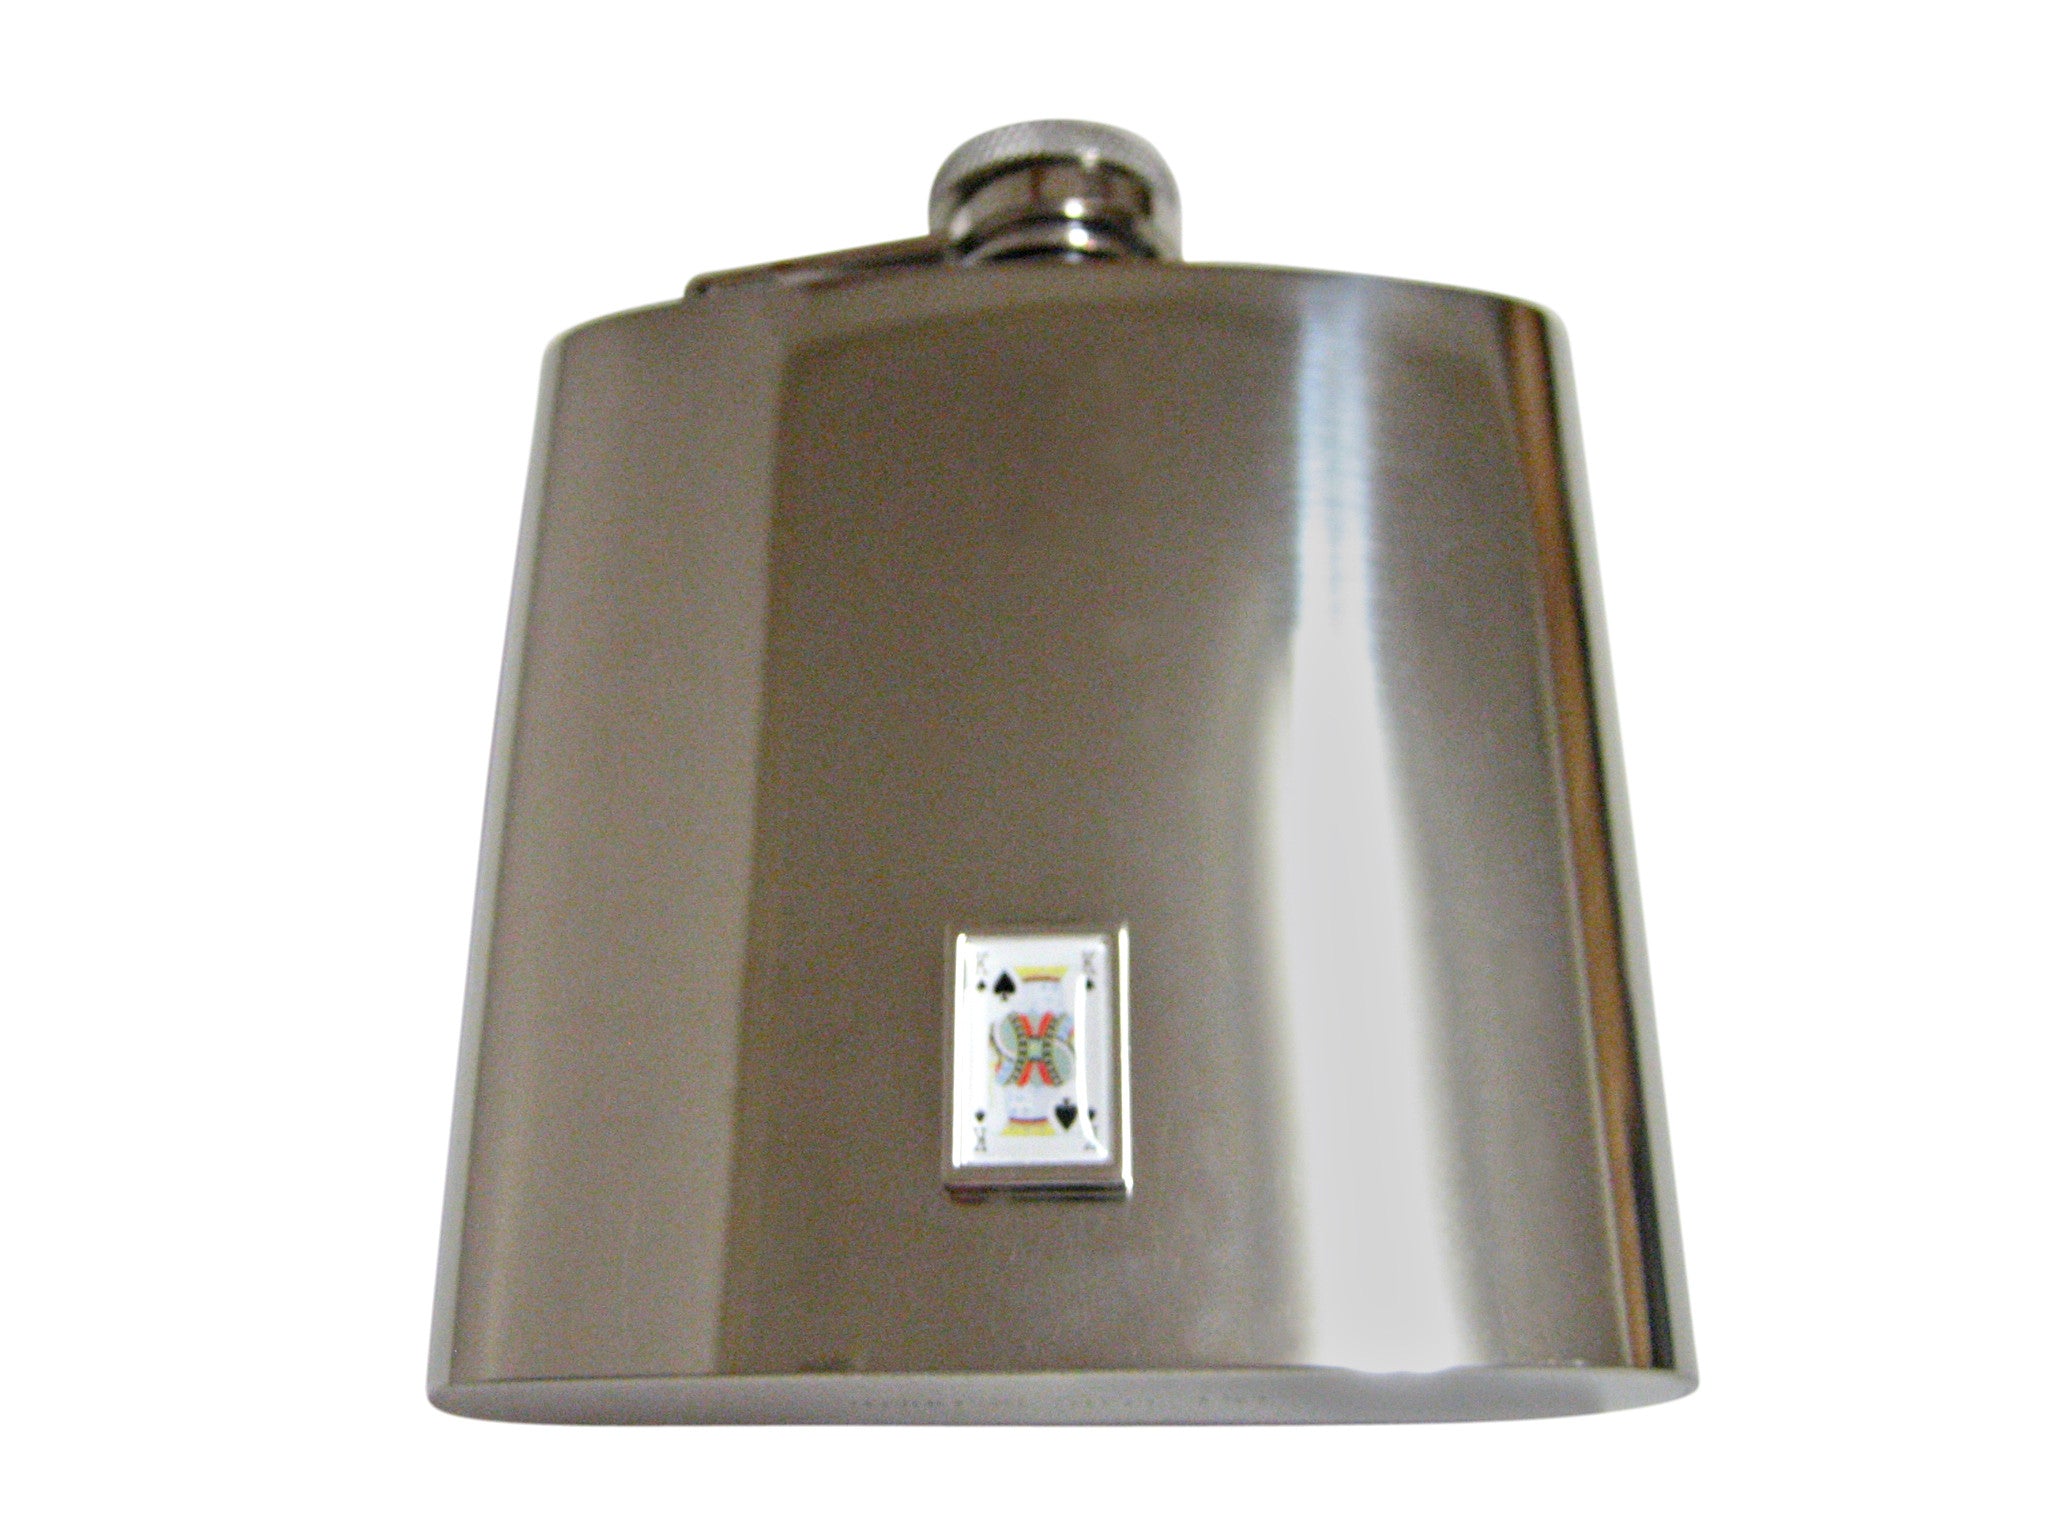 King of Spades 6 Oz. Stainless Steel Flask